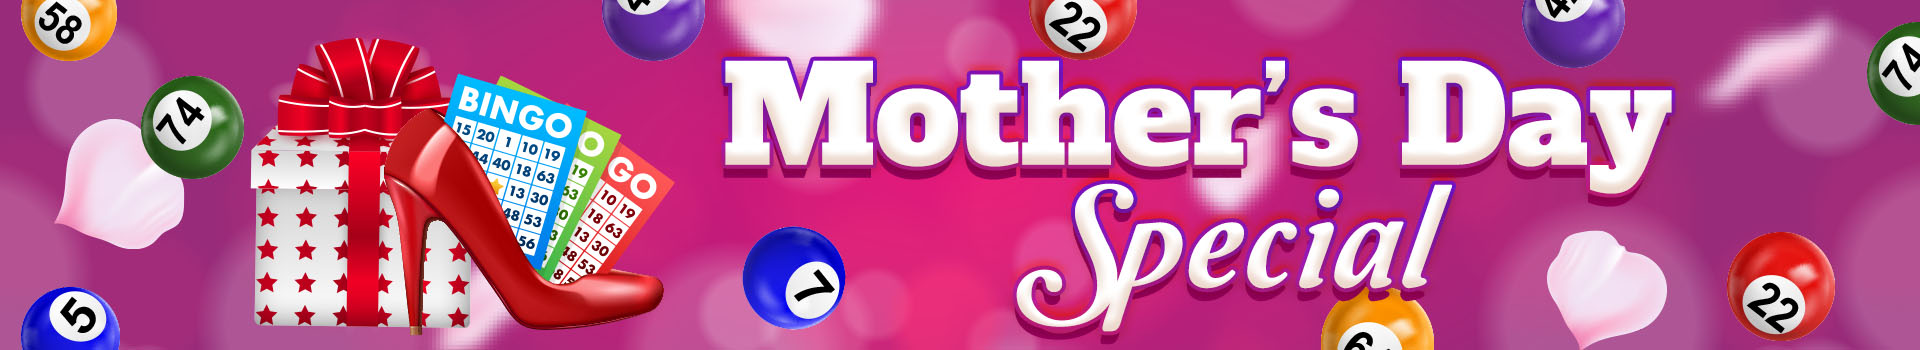 Mother’s Day Special Banner